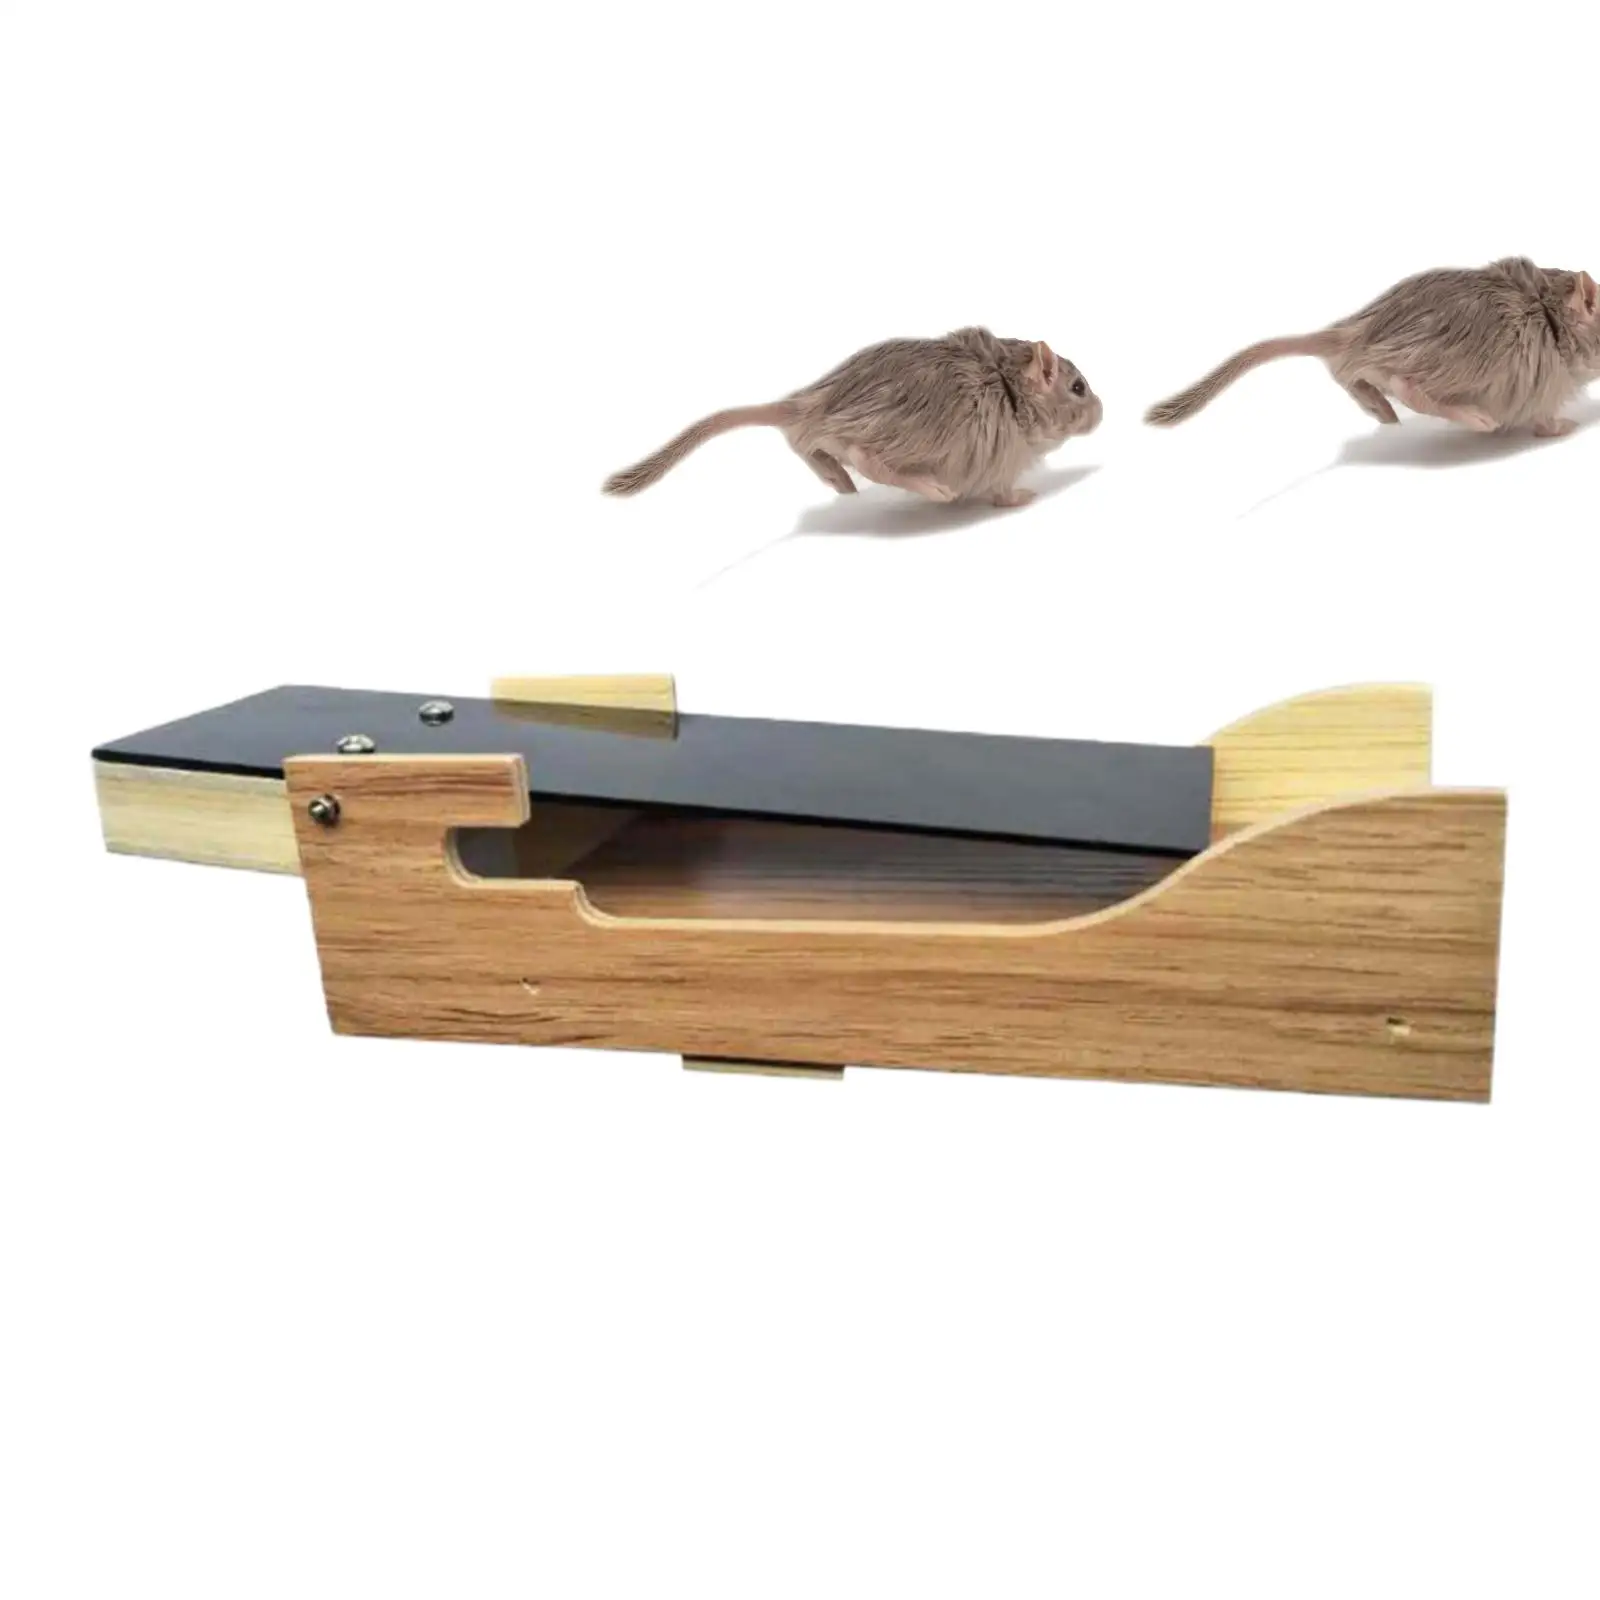 Auto Reset Humane Mouse Traps No Pain Catch Rat Trap Mice Trap Mouse Killer for Garden Warehouse Garage Outdoor Indoor